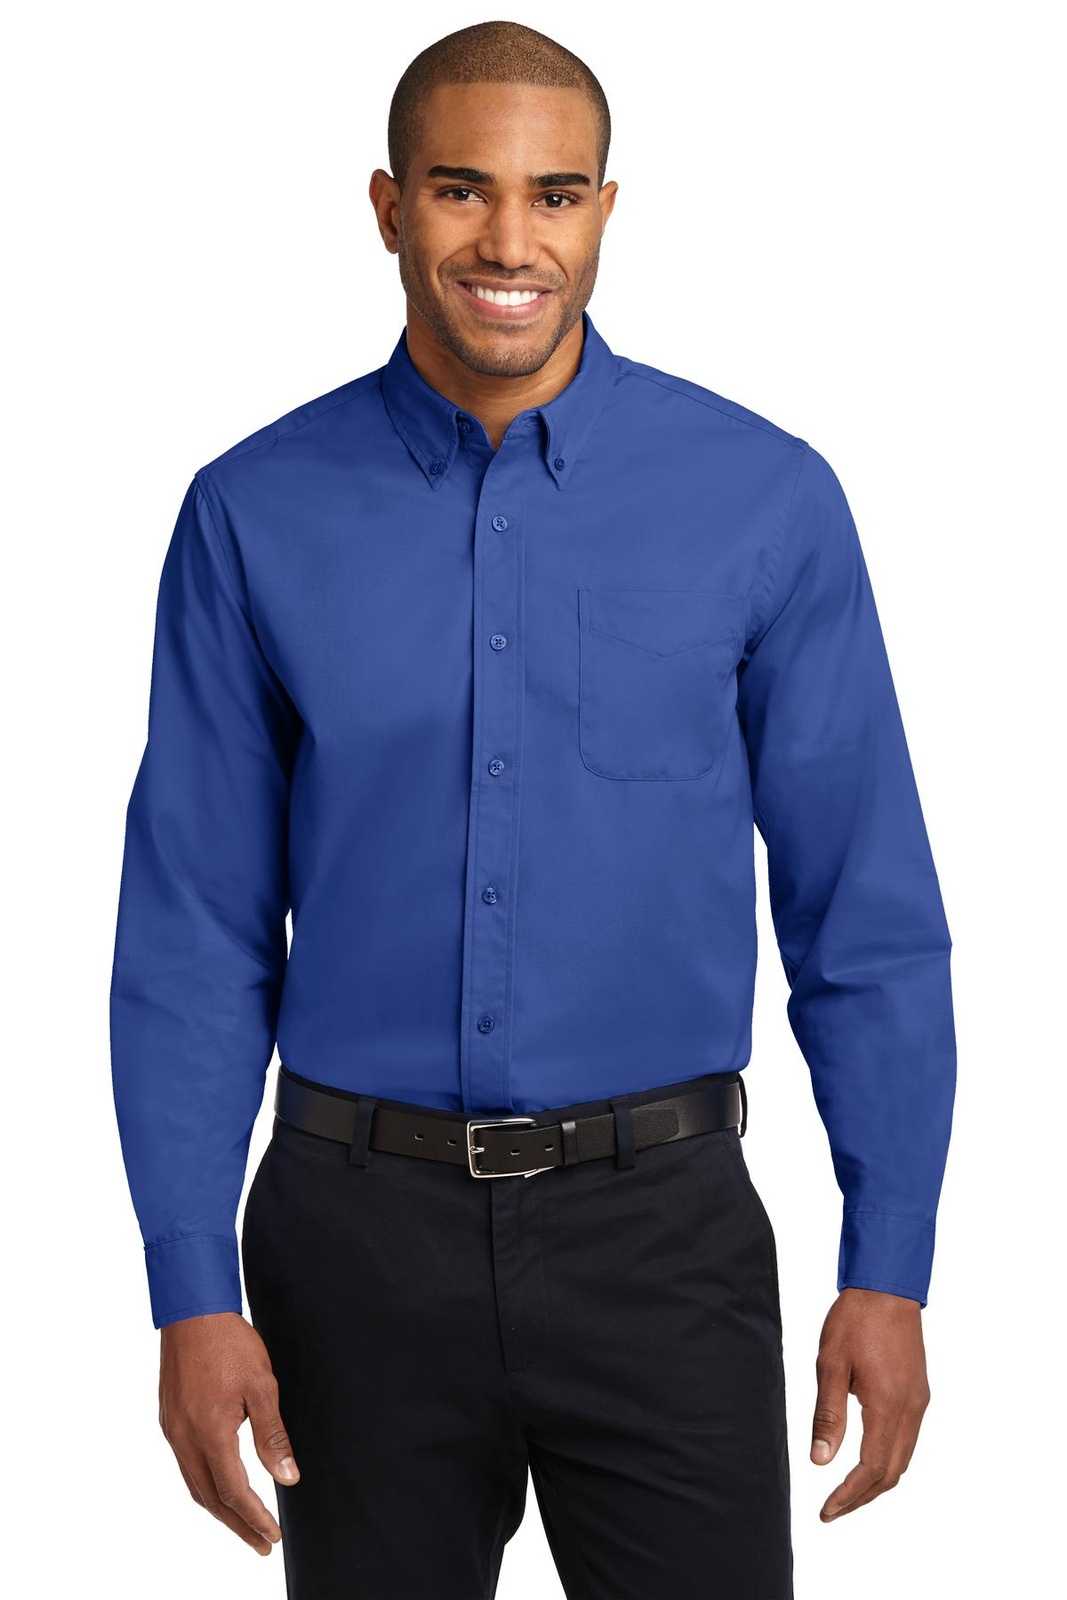 Port Authority S608 Long Sleeve Easy Care Shirt - Royal Classic Navy - HIT a Double - 1